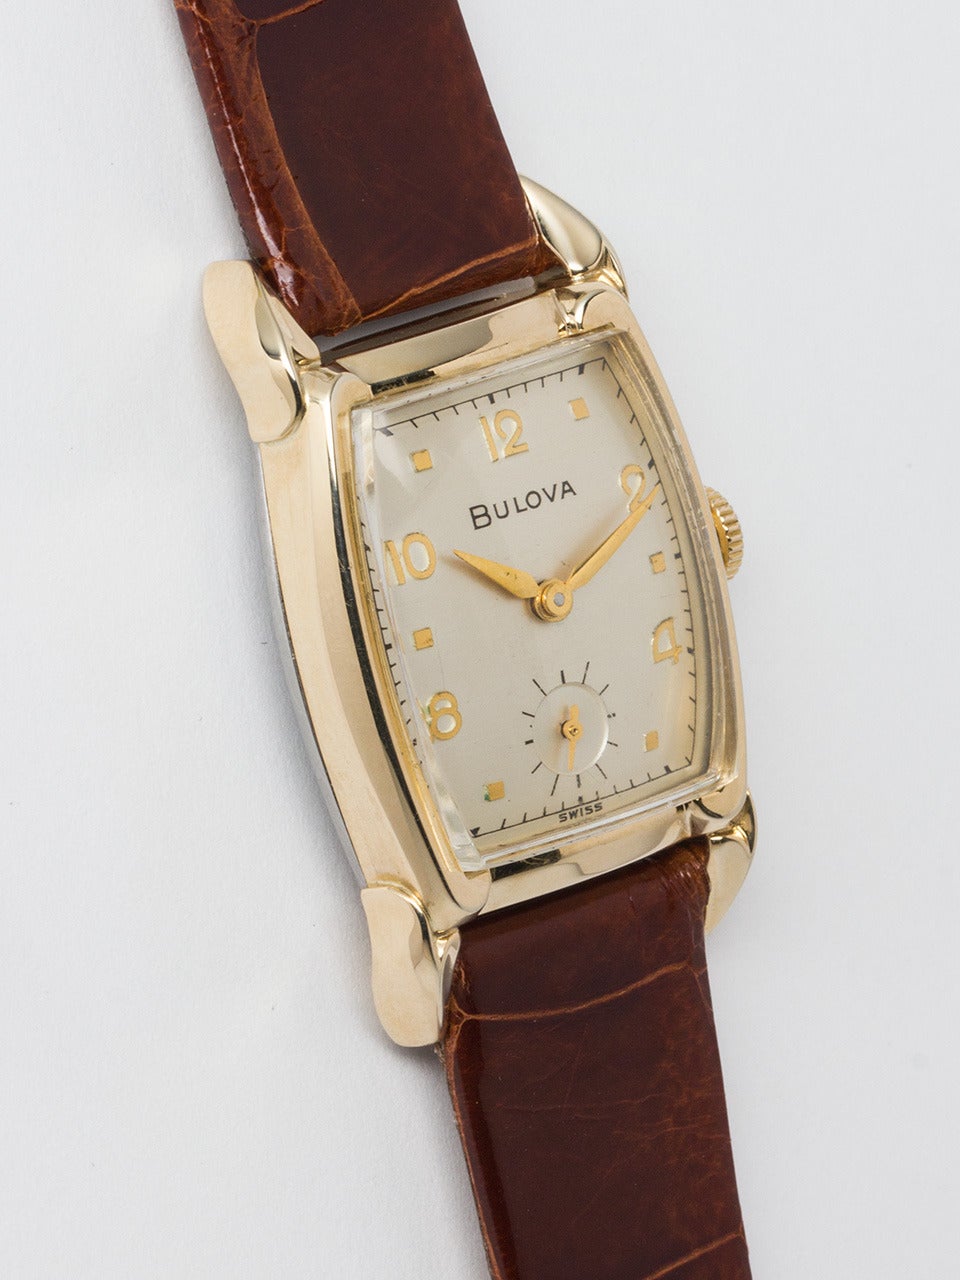 Bulova Yellow Gold Filled Dress Wristwatch circa 1950s. Tonneau shaped 25 X 40 mm case with original satin silvered dial with raised gold numerals and dots and tapered gilt hands. Powered by 17 jewel manual wind caliber 10BT movement with subsidiary